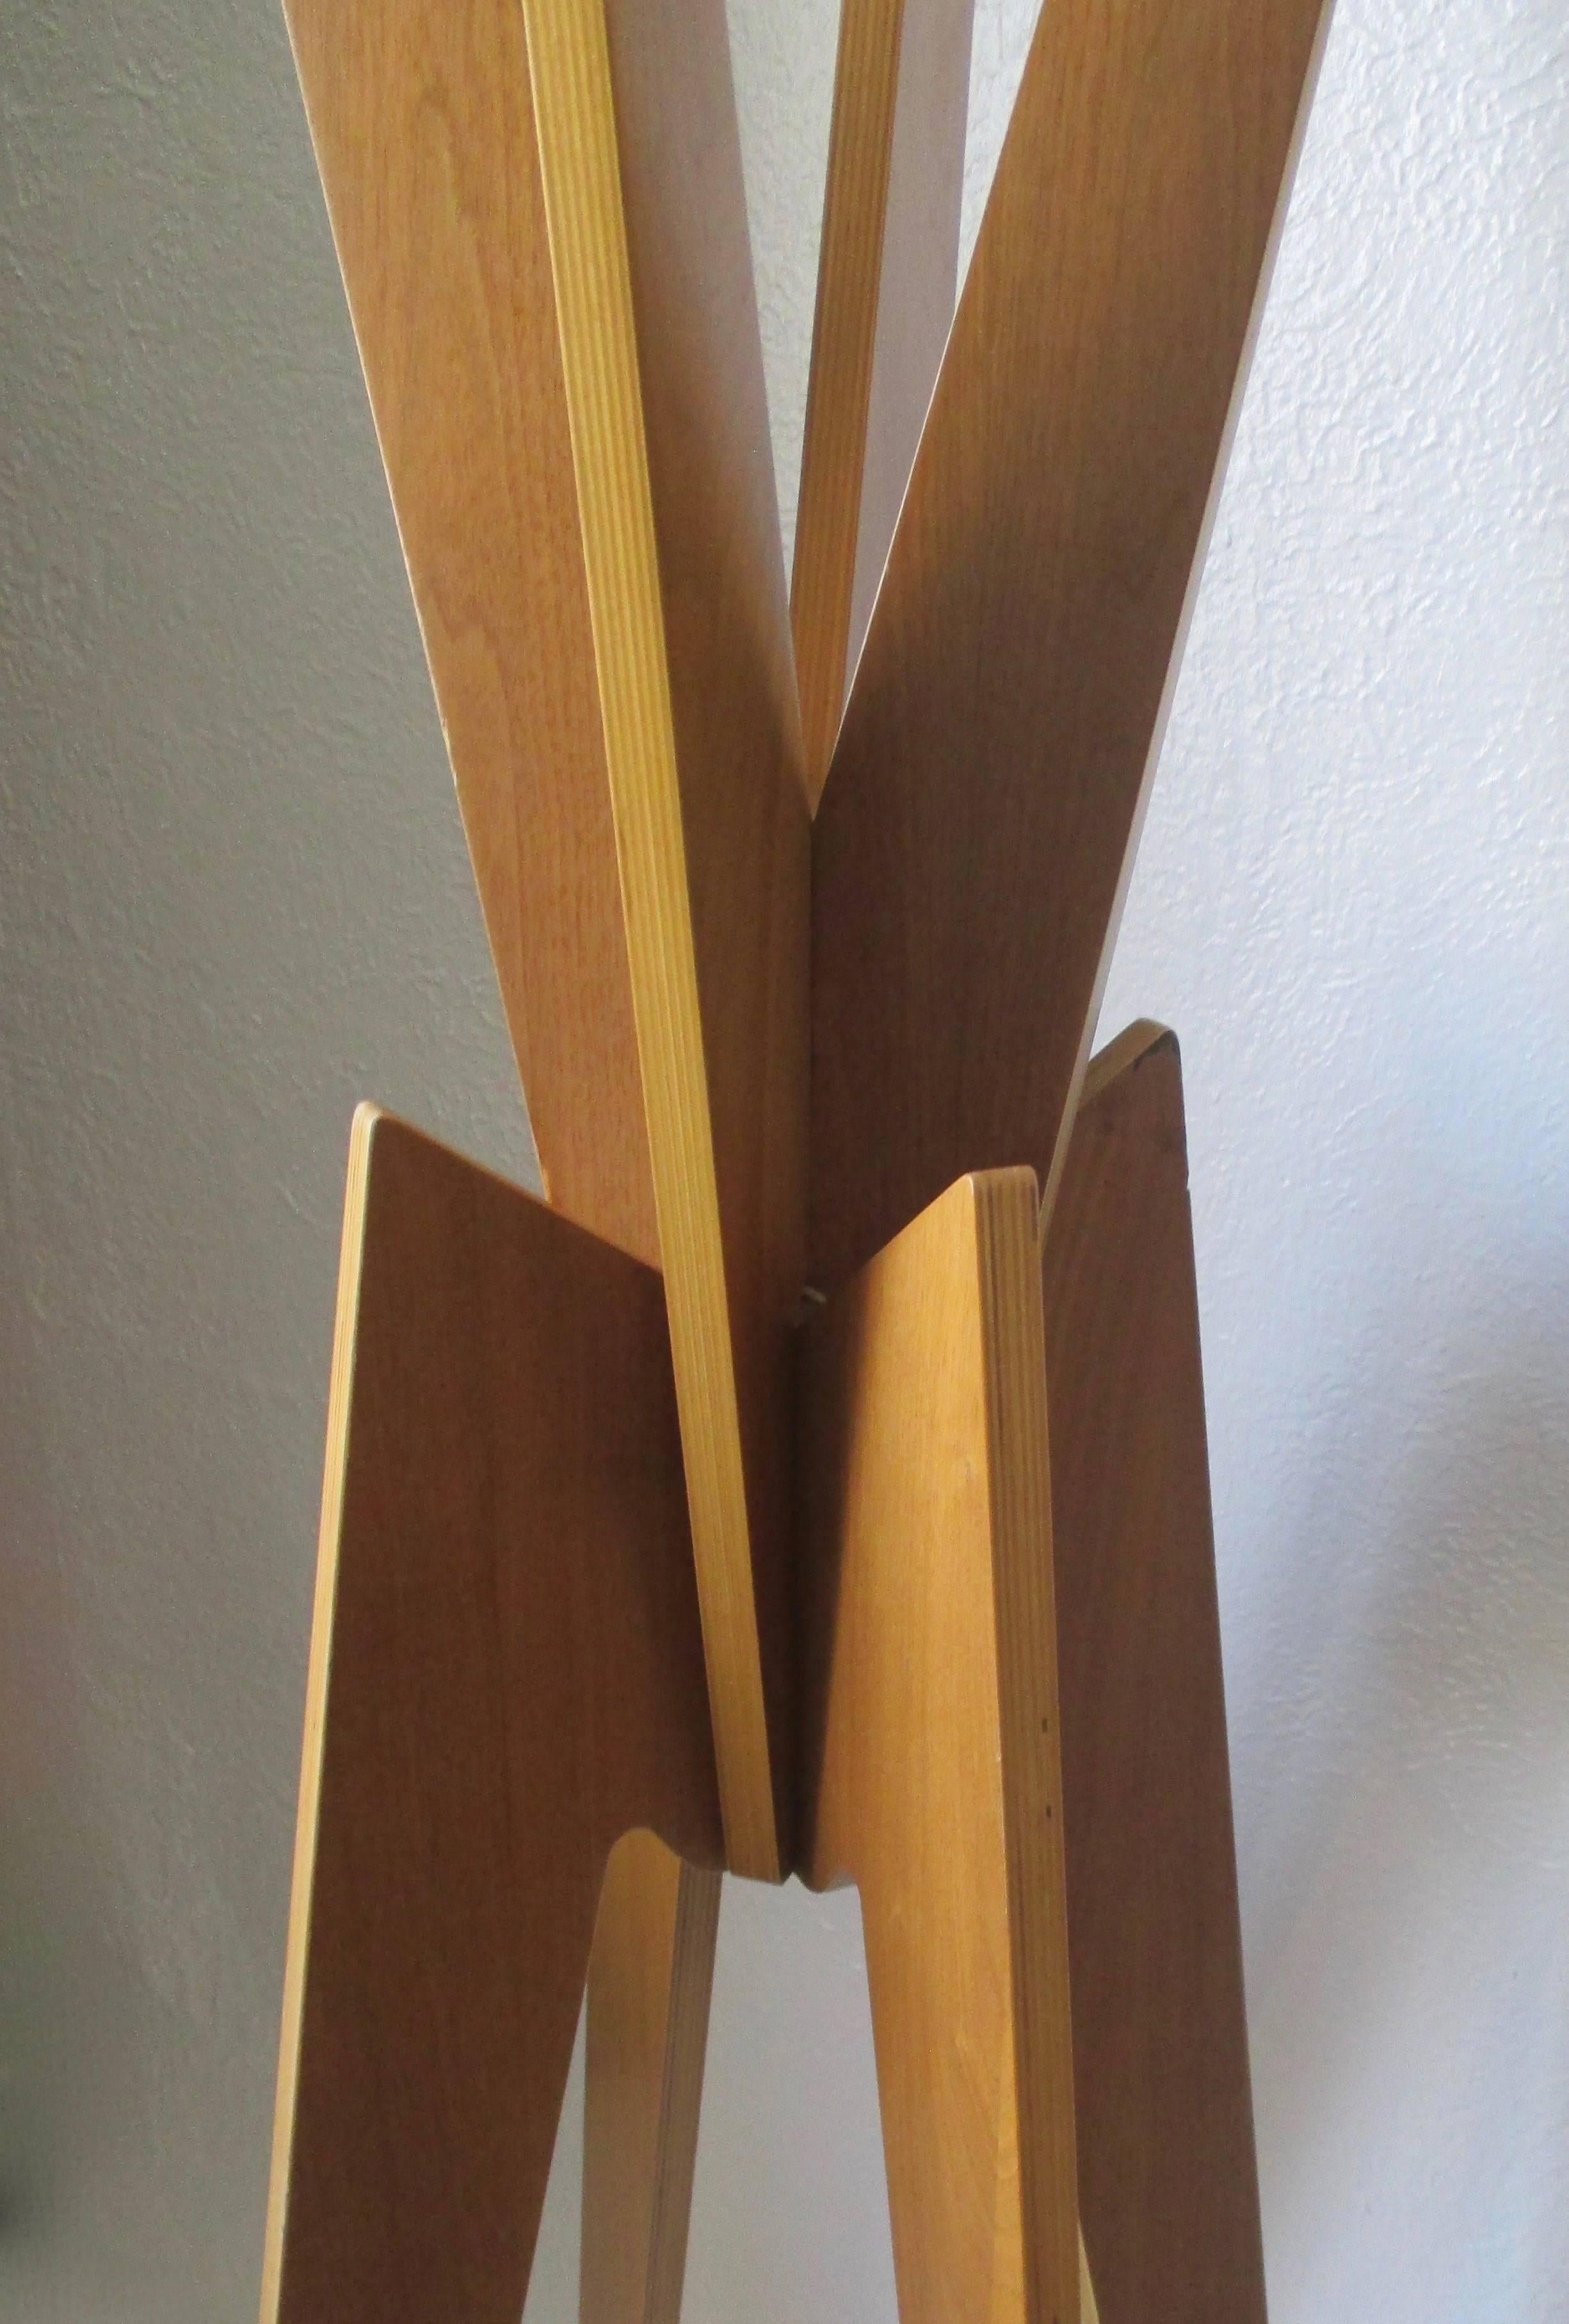 Coatstand 'Nyota' by Shin Azumi In Good Condition For Sale In West Palm Beach, FL